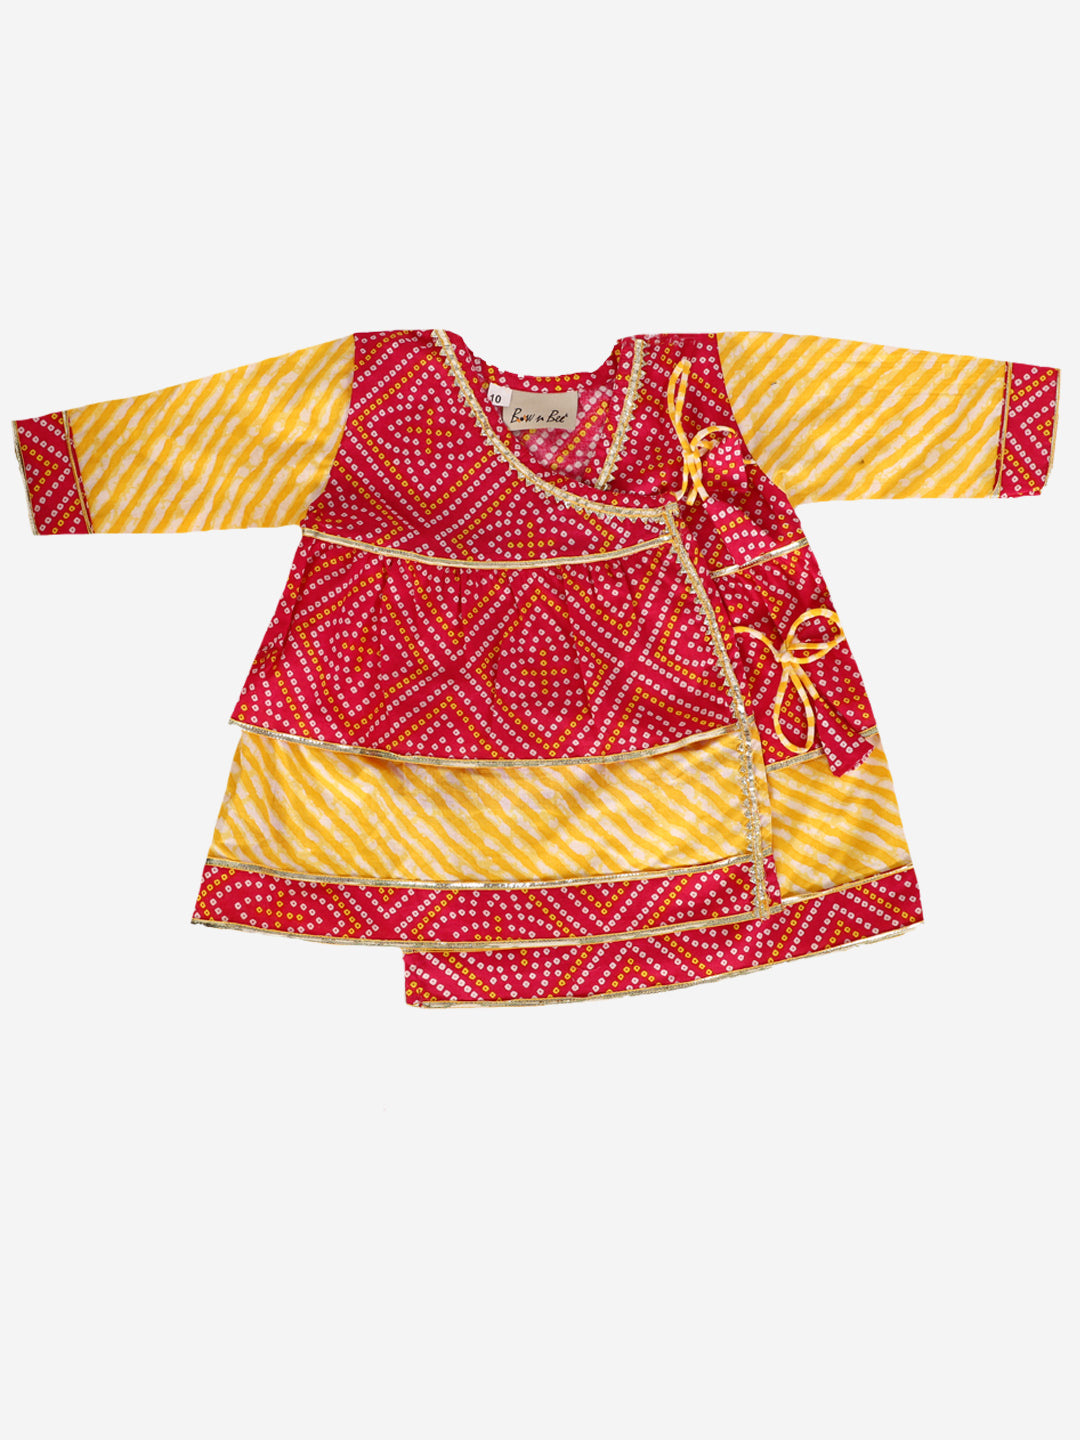 BownBee Pure Cotton Full Sleeve Jamna Set For Girls - Yellow